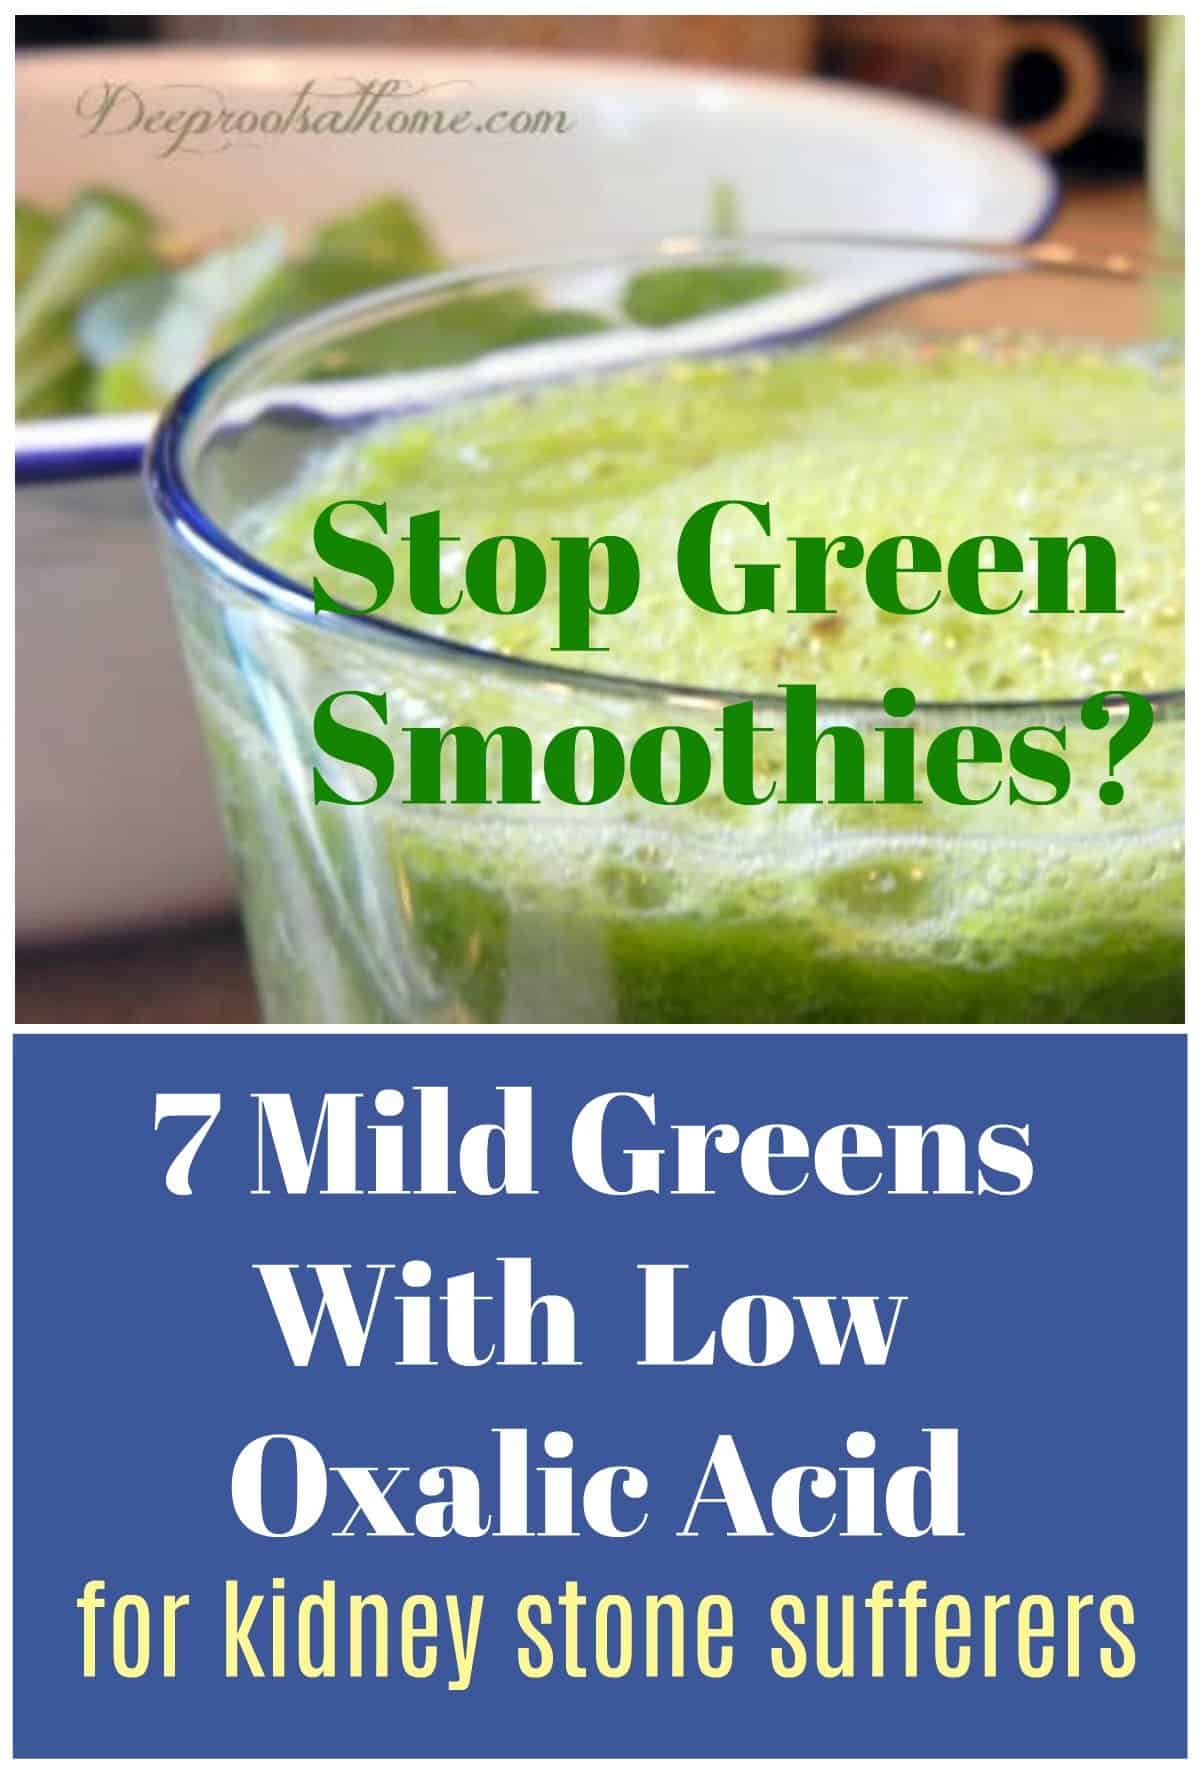 Stop Green Smoothies? 7 Mild Greens With Low Oxalic Acid. A bright green smoothie.